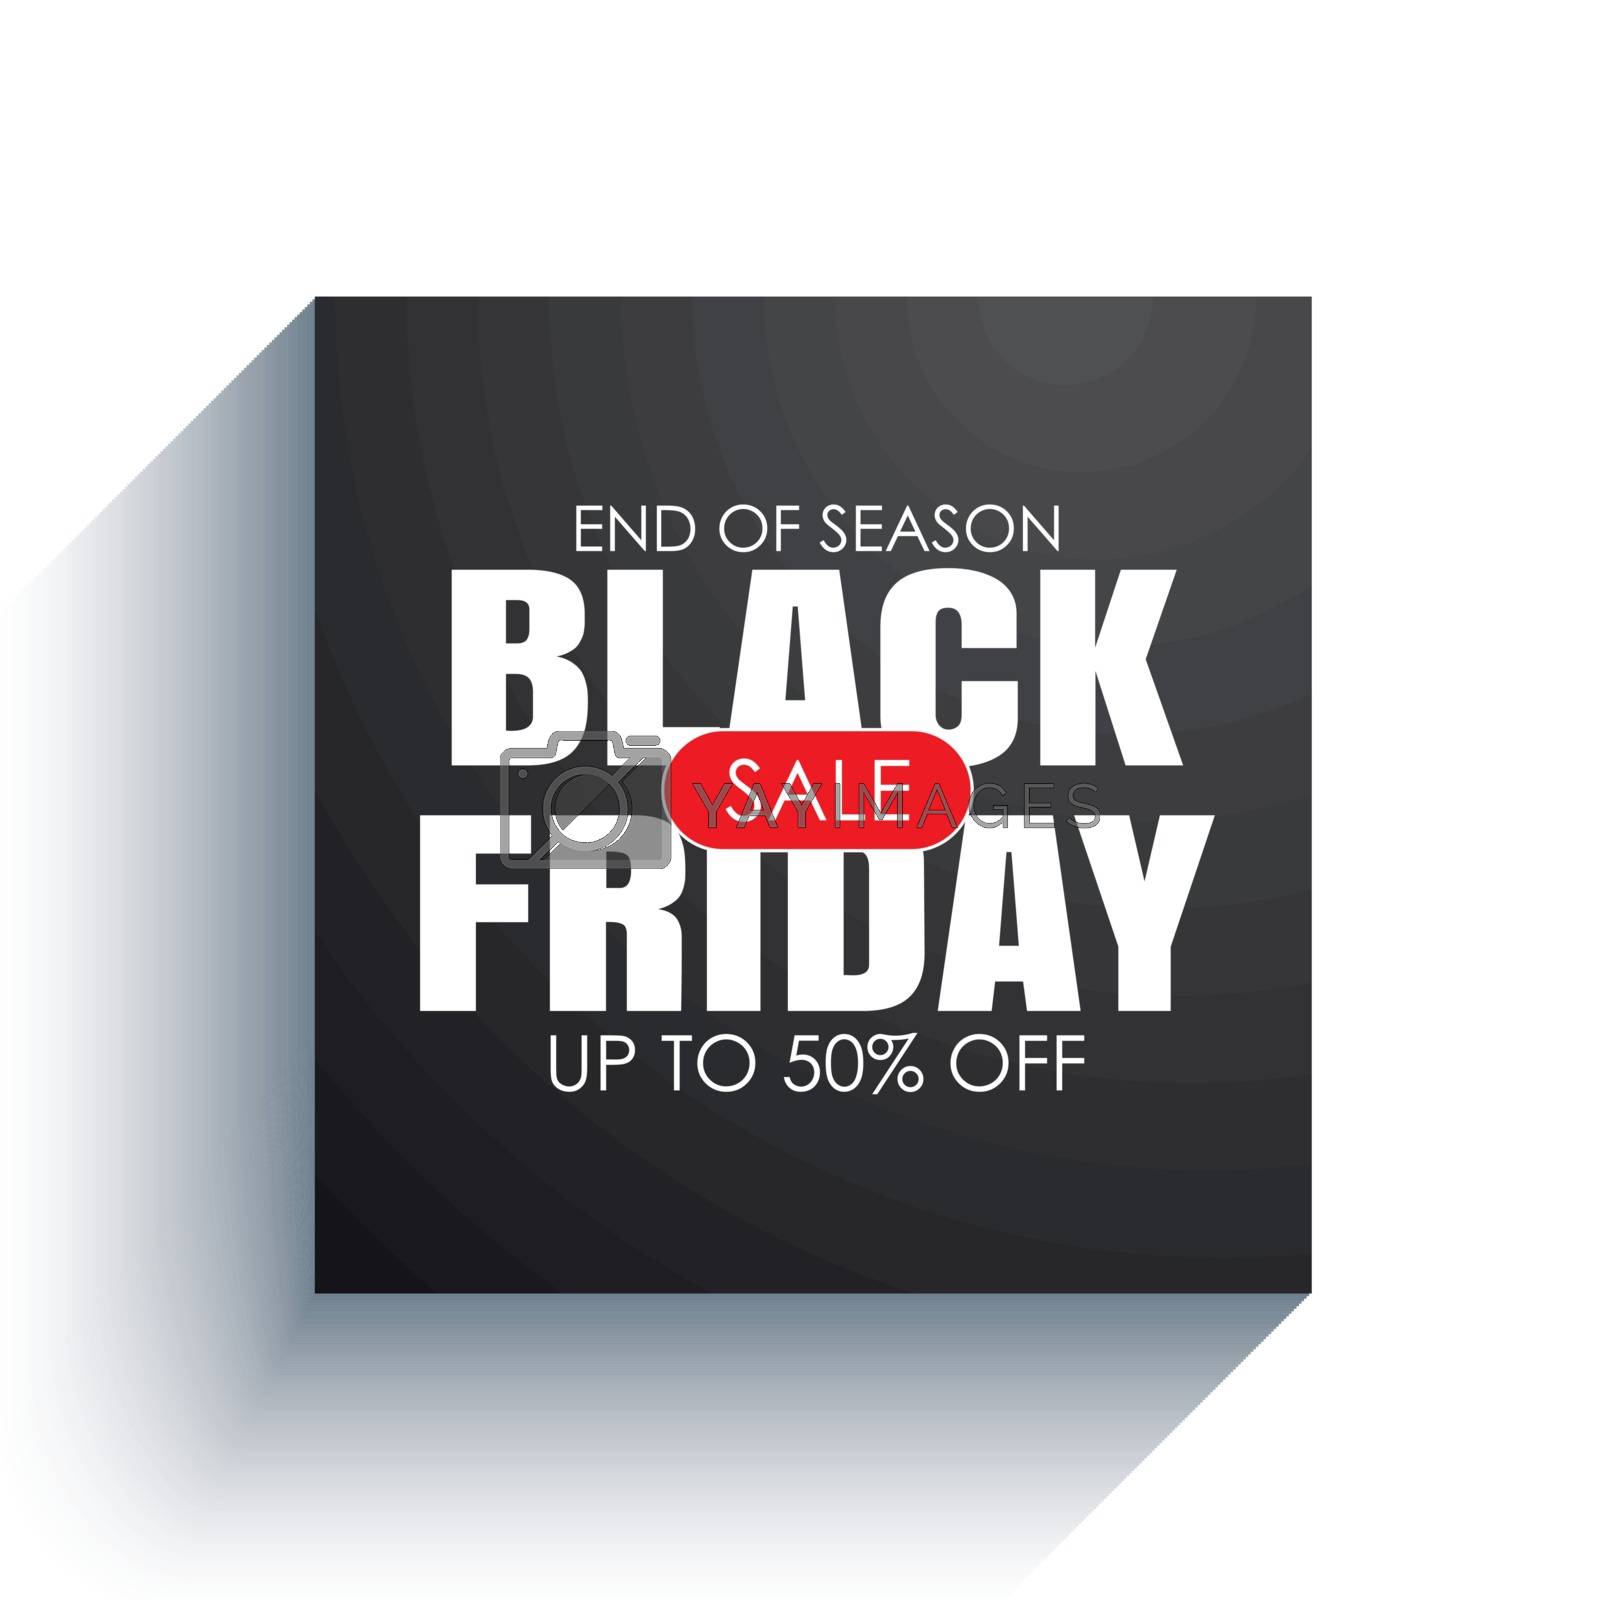 Royalty free image of Black friday sale banner with white text on black square backgro by kaisorn